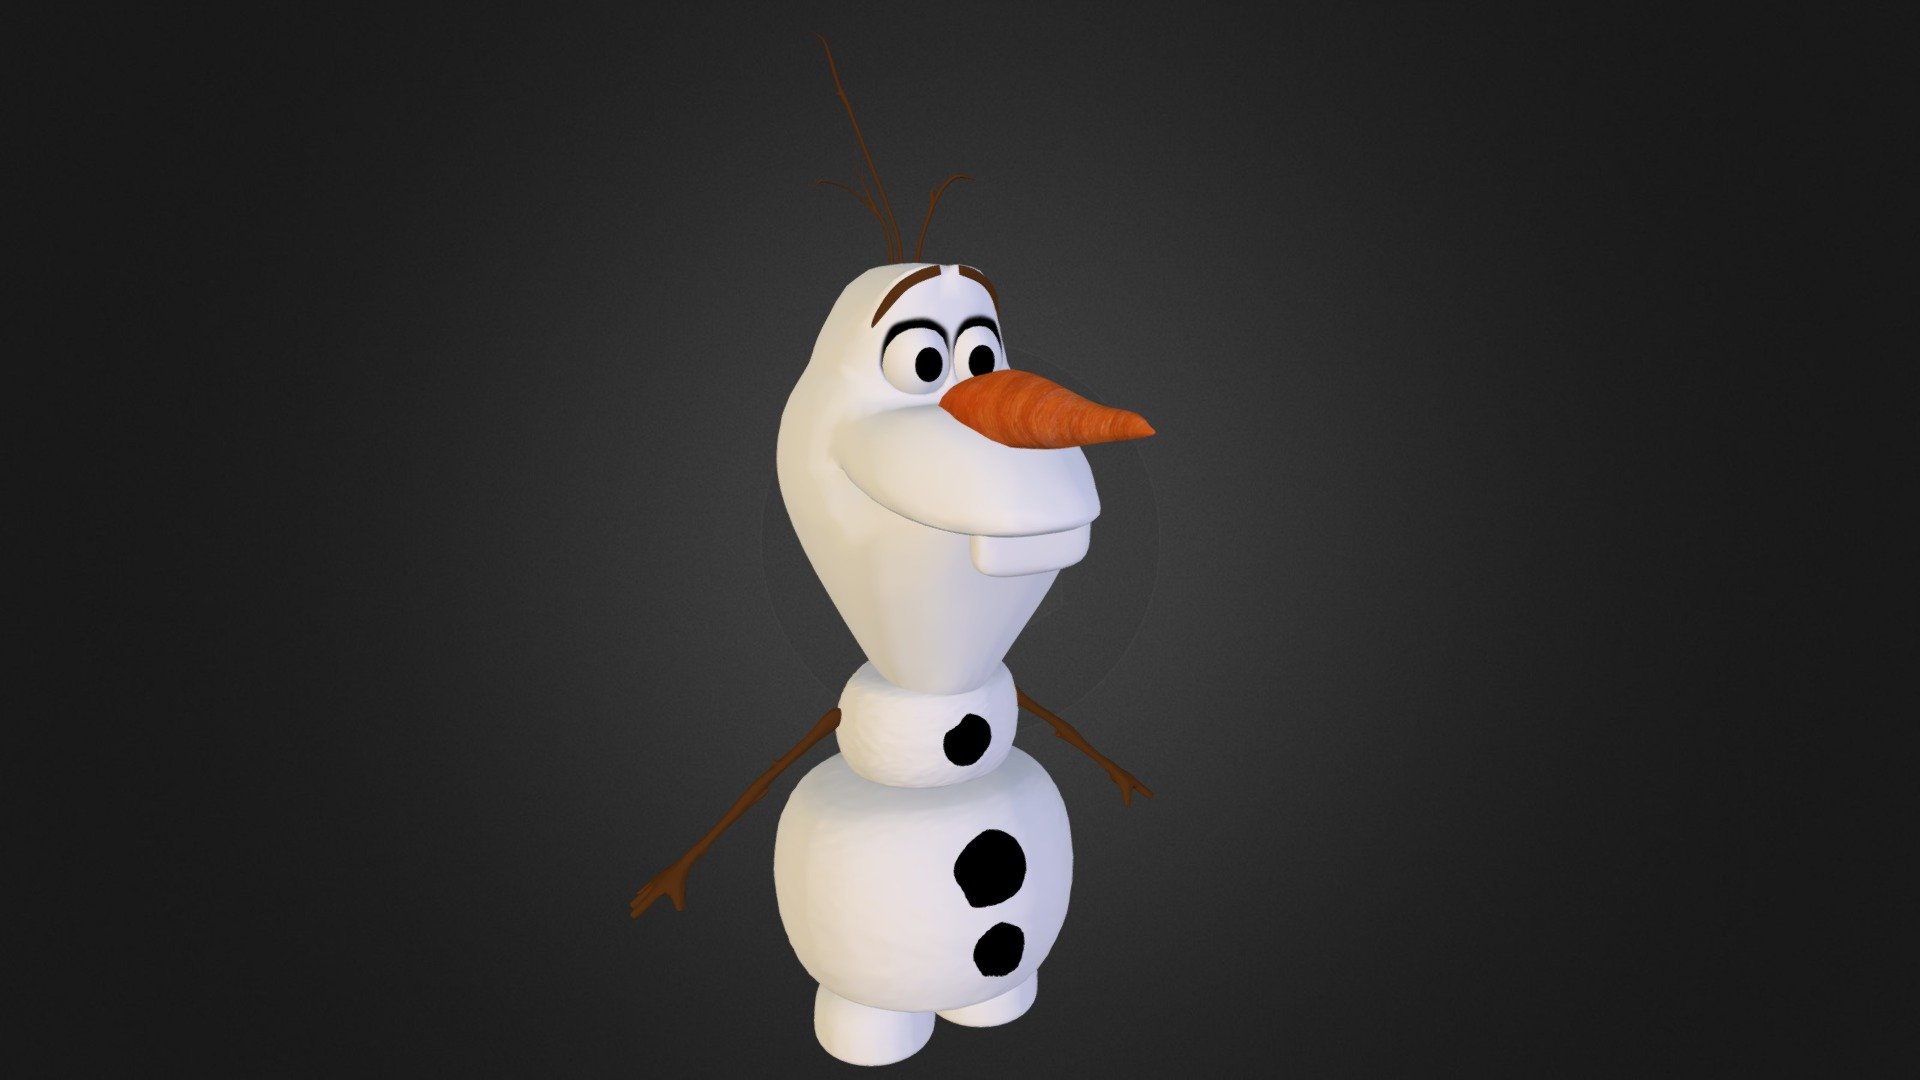 Olaf is a snowman, a character of &ldquo;Frozen